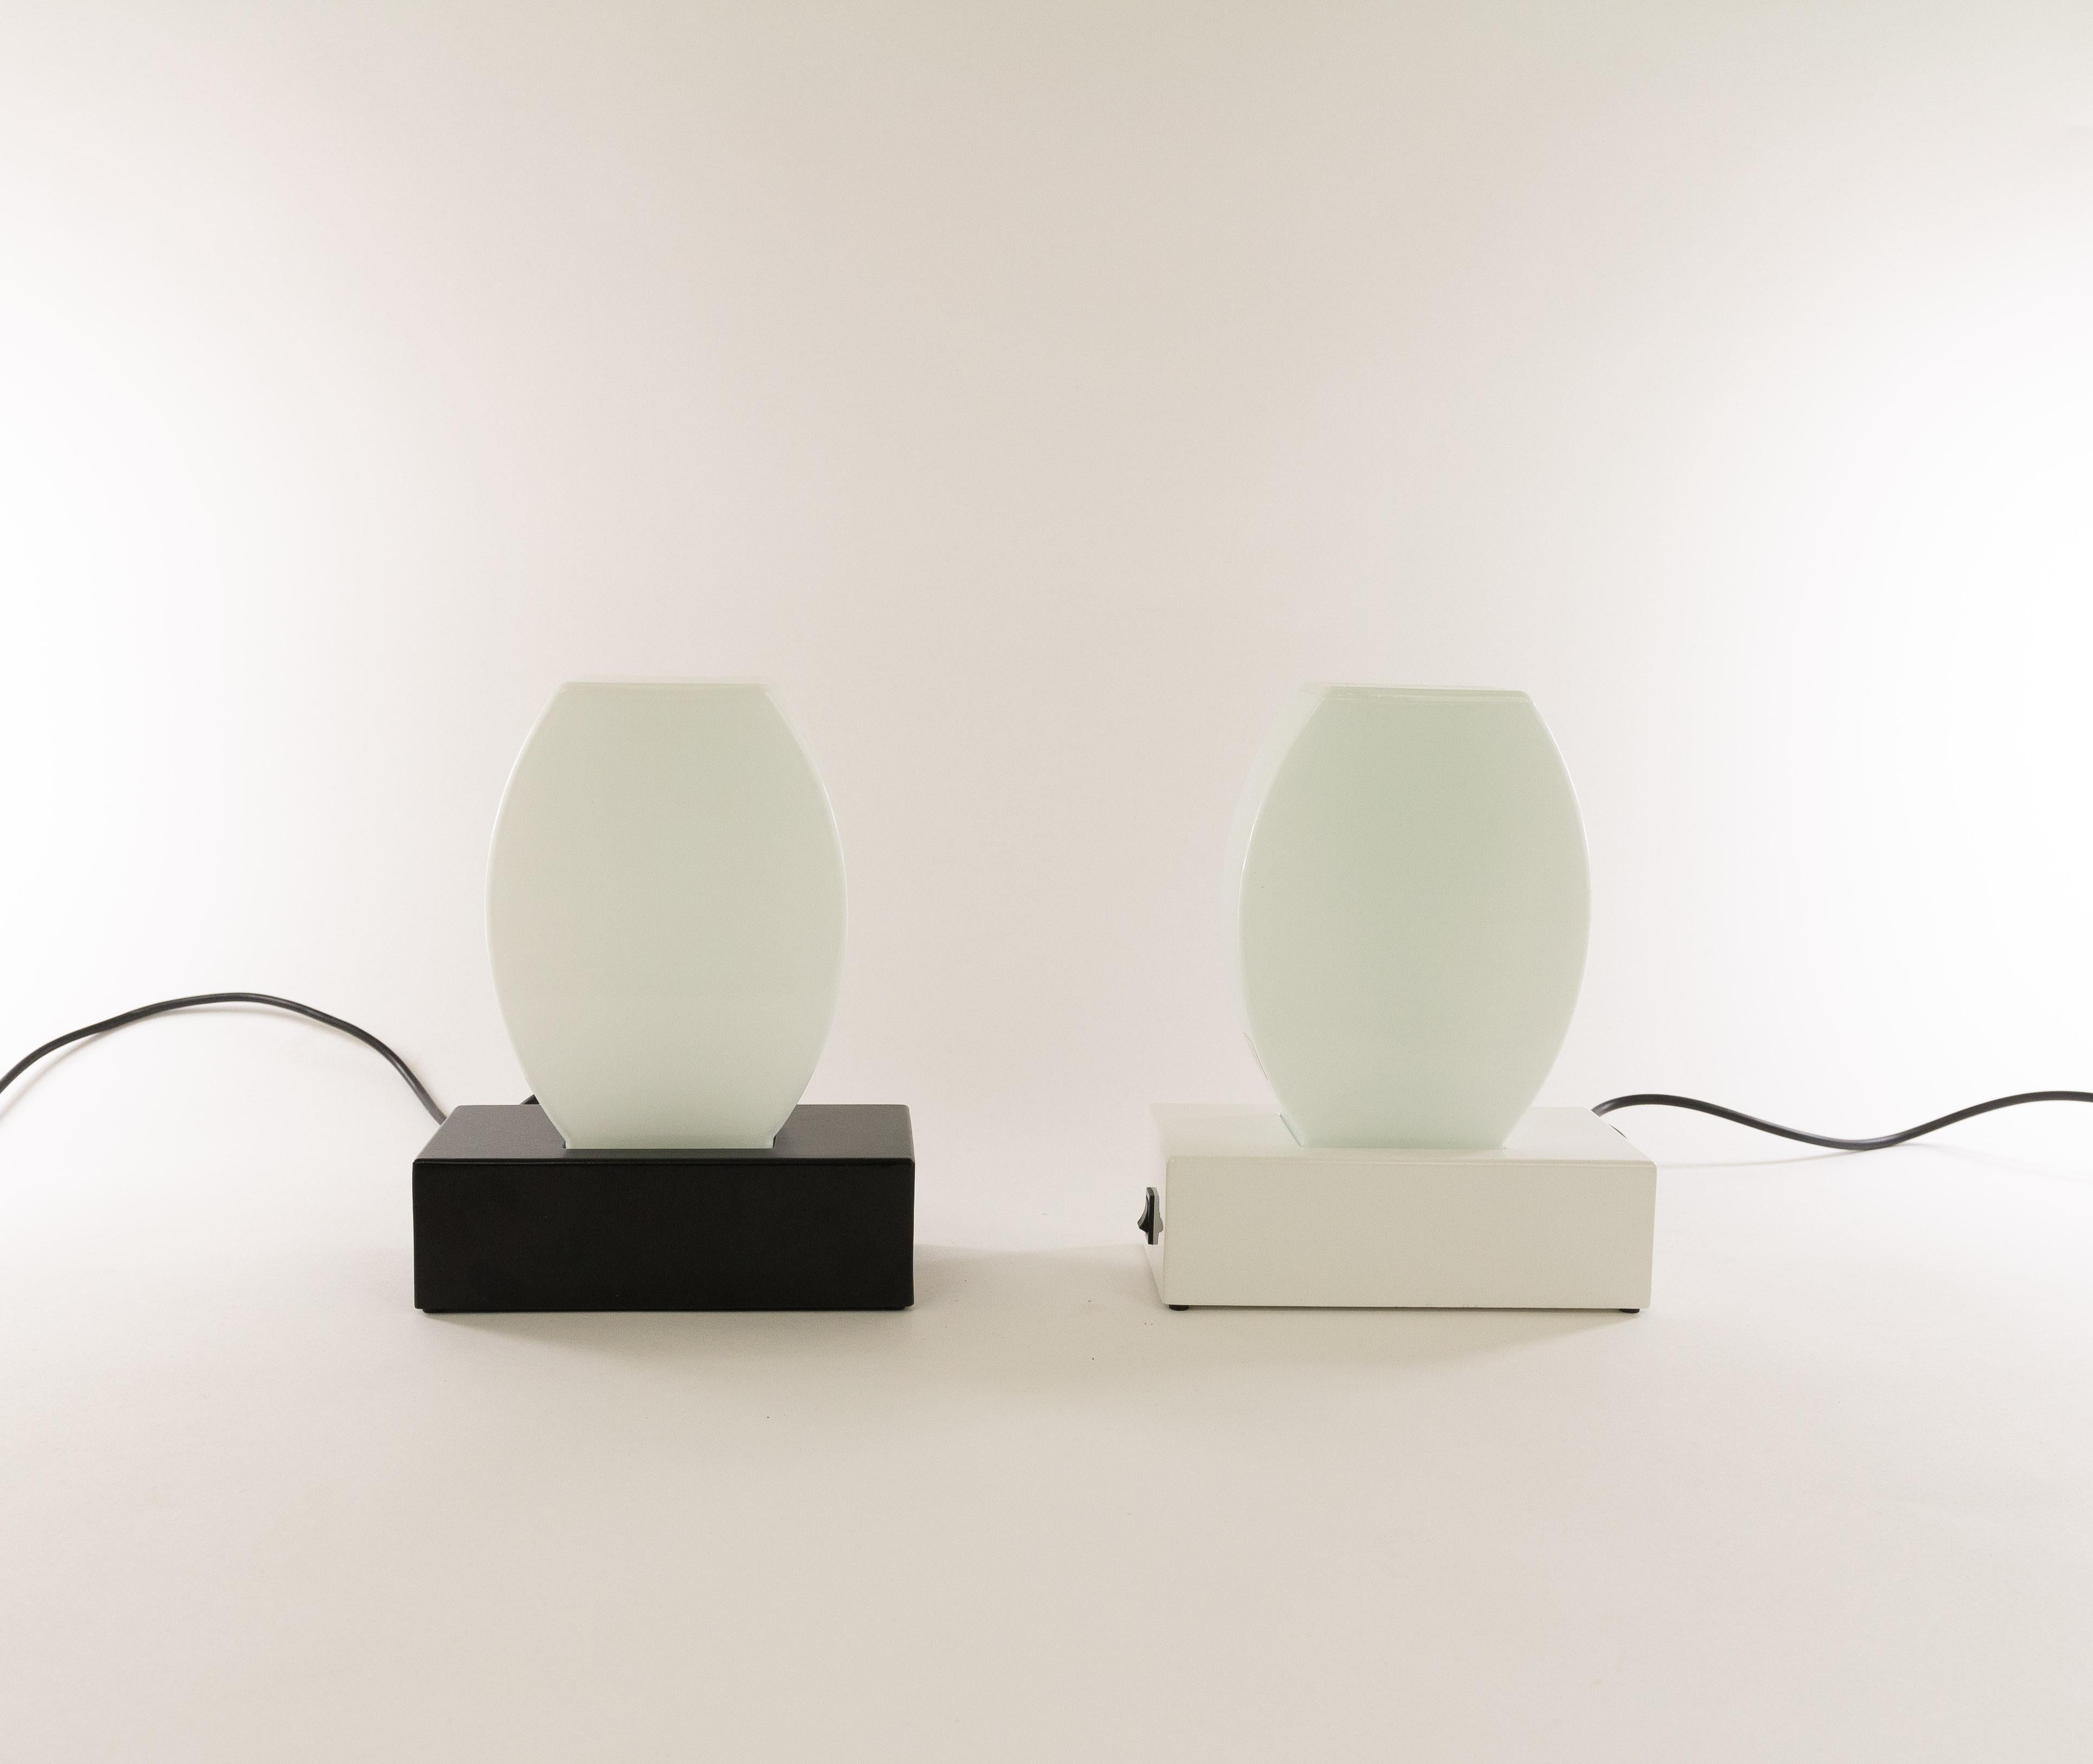 Pair of Dorane table lamps designed in 1977 by Ettore Sottsass and manufactured by Stilnovo, Milan.

The base of these lamps is made of lacquered metal (one in white and the other one in black). The shade is made of Murano glass. It has the